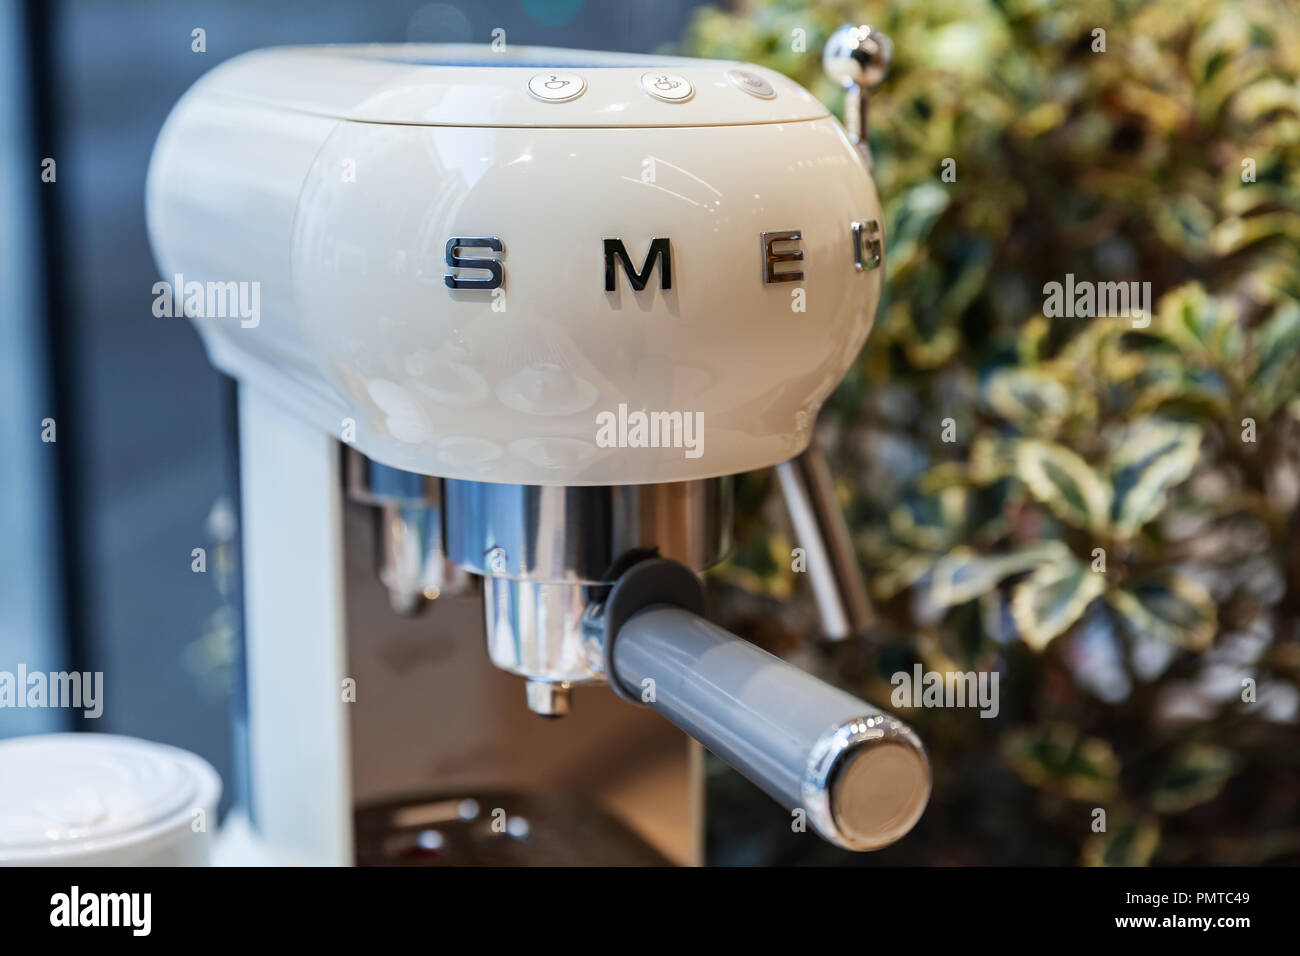 Milan, Italy - January 19, 2018: Espresso Coffee maker by Smeg. It is an Italian manufacturer of upmarket domestic appliances Stock Photo